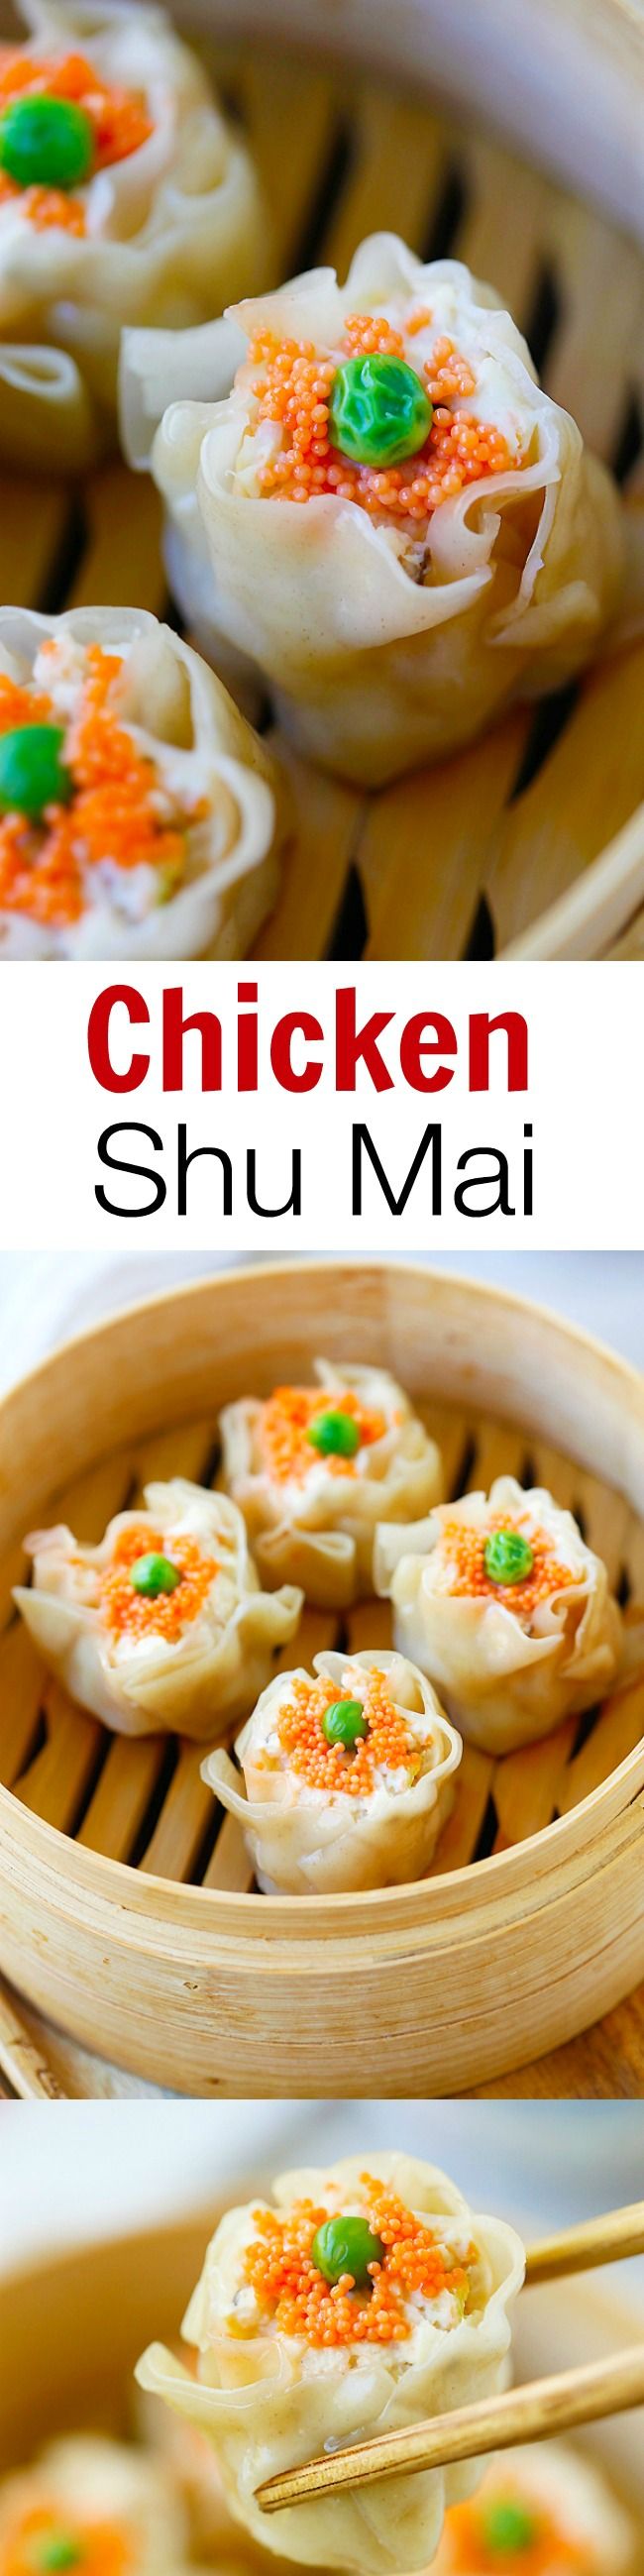 Chicken Shu Mai (Siu Mai) is a popular dim sum item. Learn how to make chicken shu mai with this quick and amazing recipe that is better than Chinatown!! | rasamalaysia.com